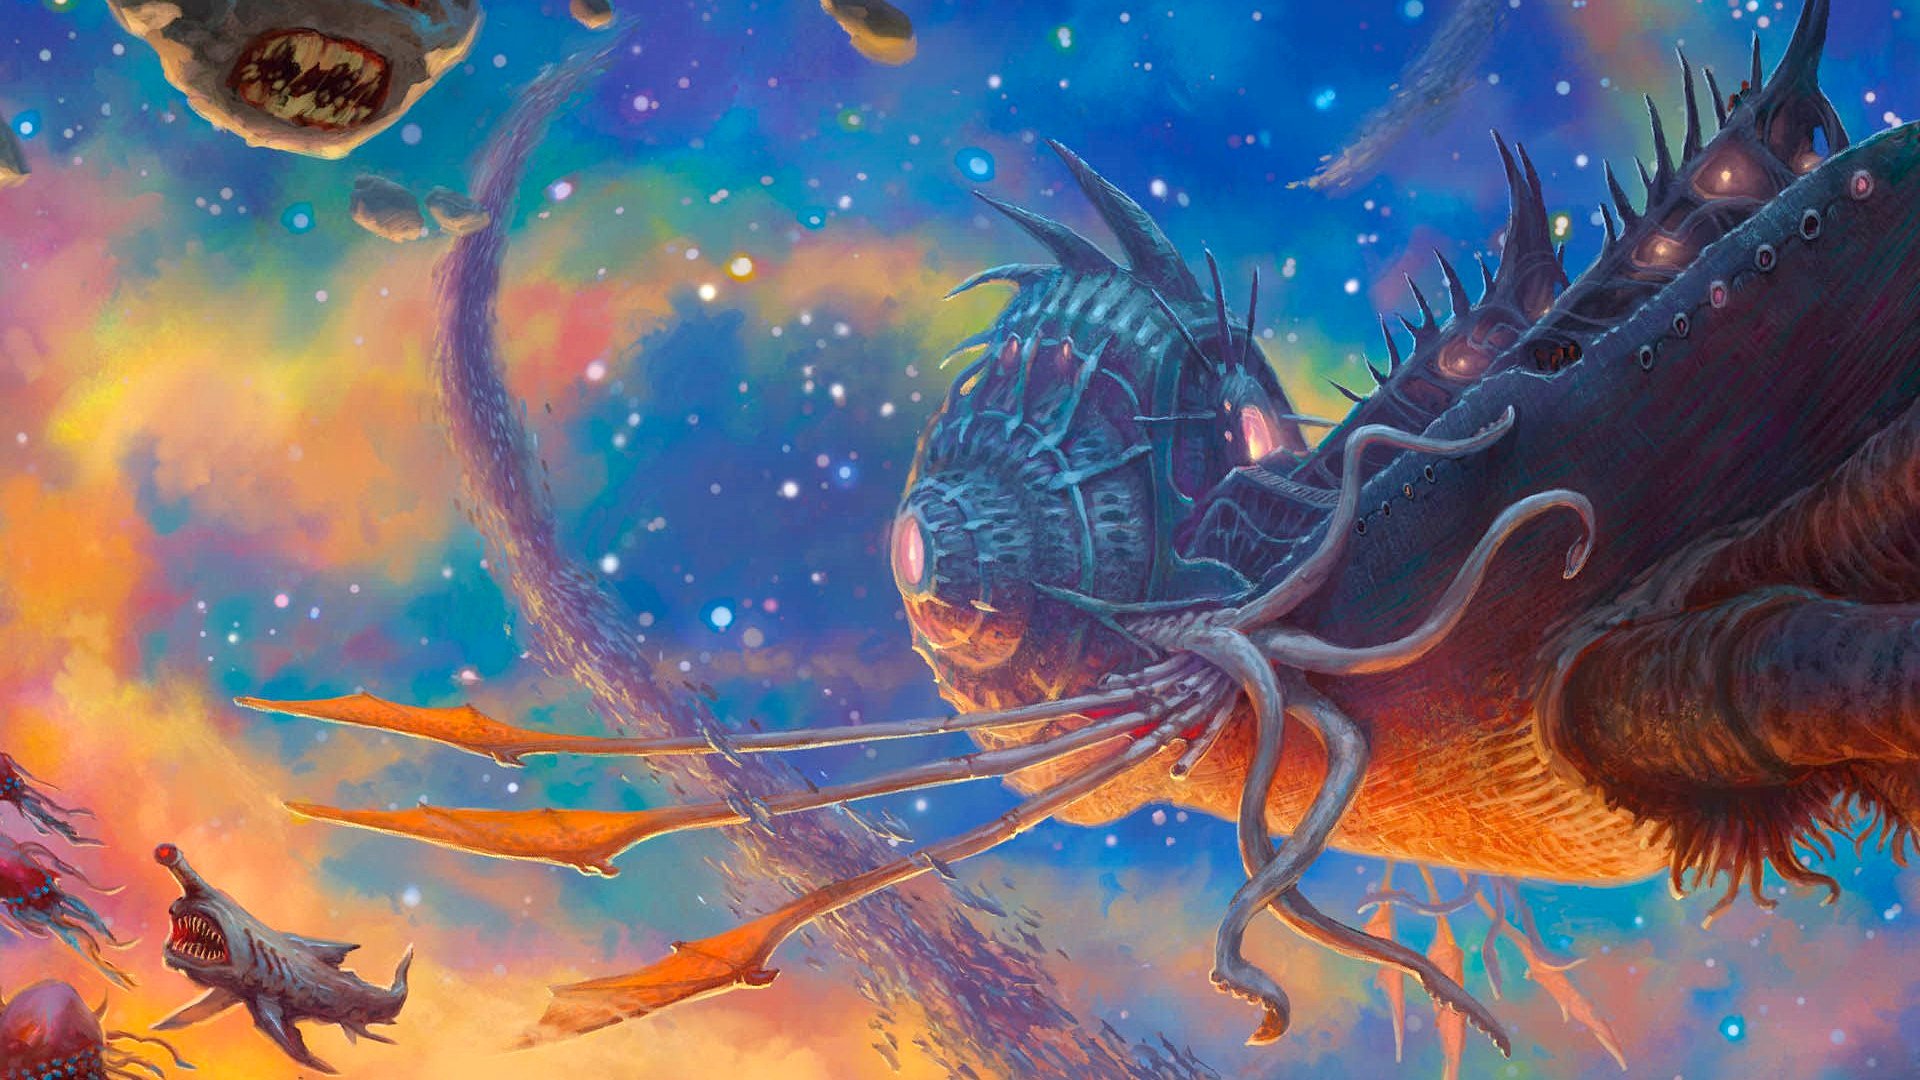 DnD one shots guide - Wizards of the Coast artwork showing an Illithid Nautiloid flying through space